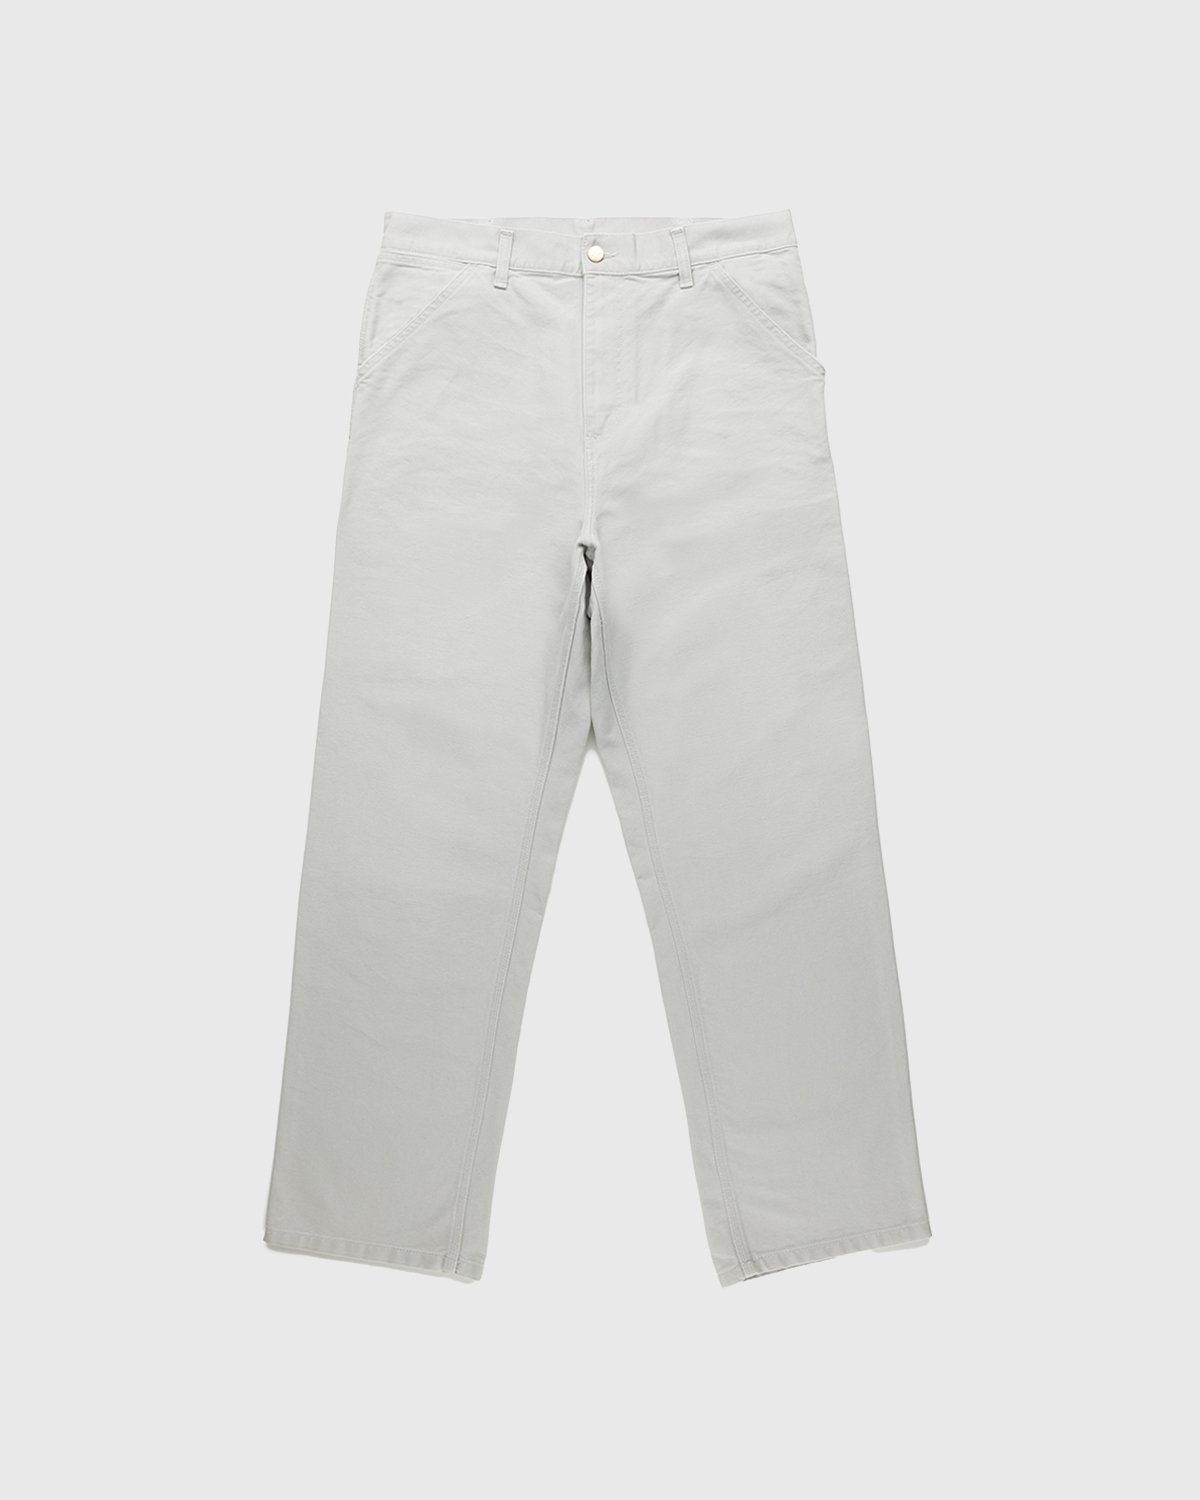 Carhartt WIP – Single Knee Pant Aged Canvas Grey - Trousers - Grey - Image 1